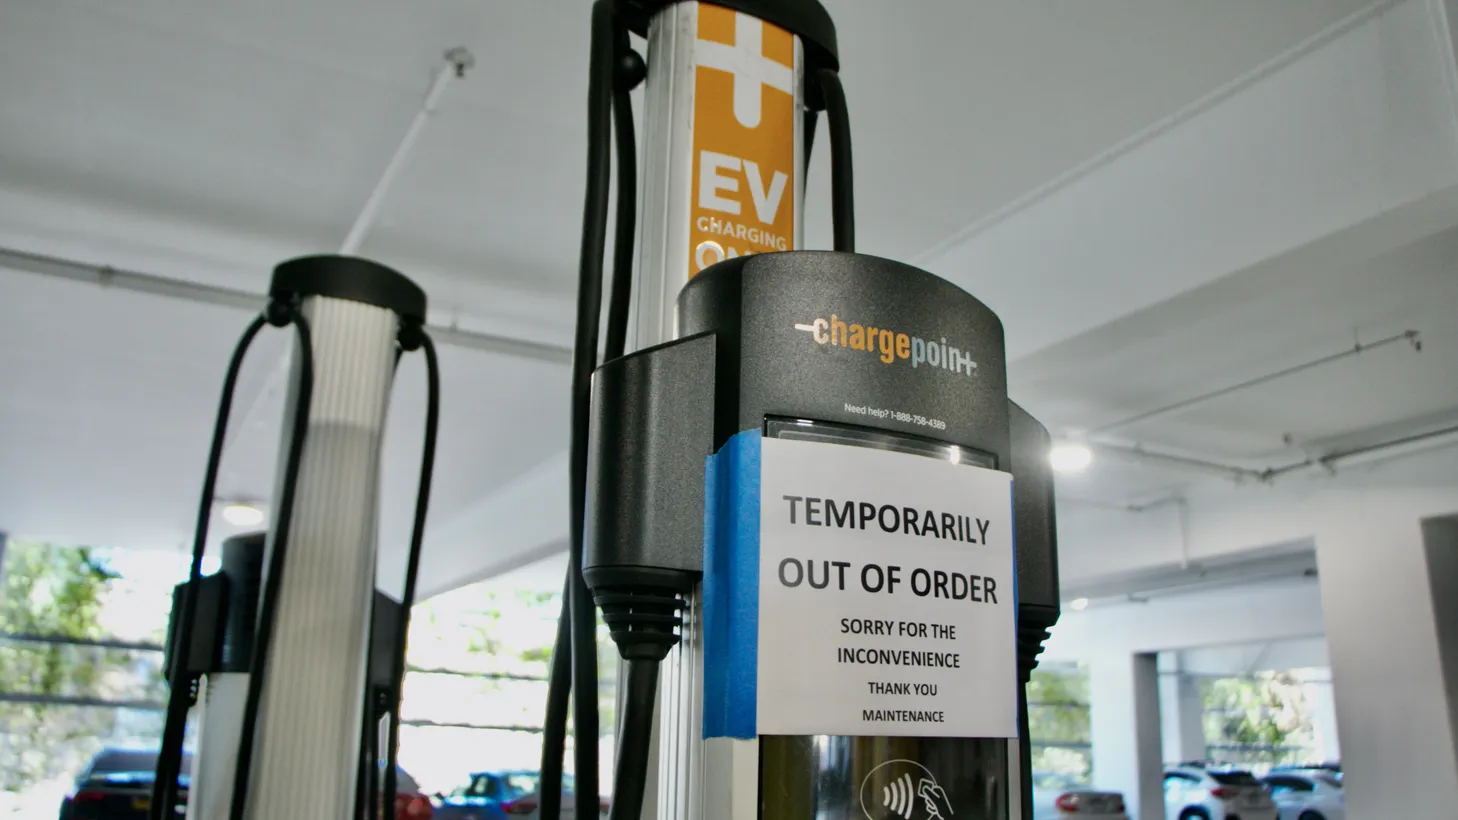 An electric vehicle charging station is out-of-order in a North Hollywood parking garage. The need for efficient repair solutions is expected to grow as more drivers go electric.